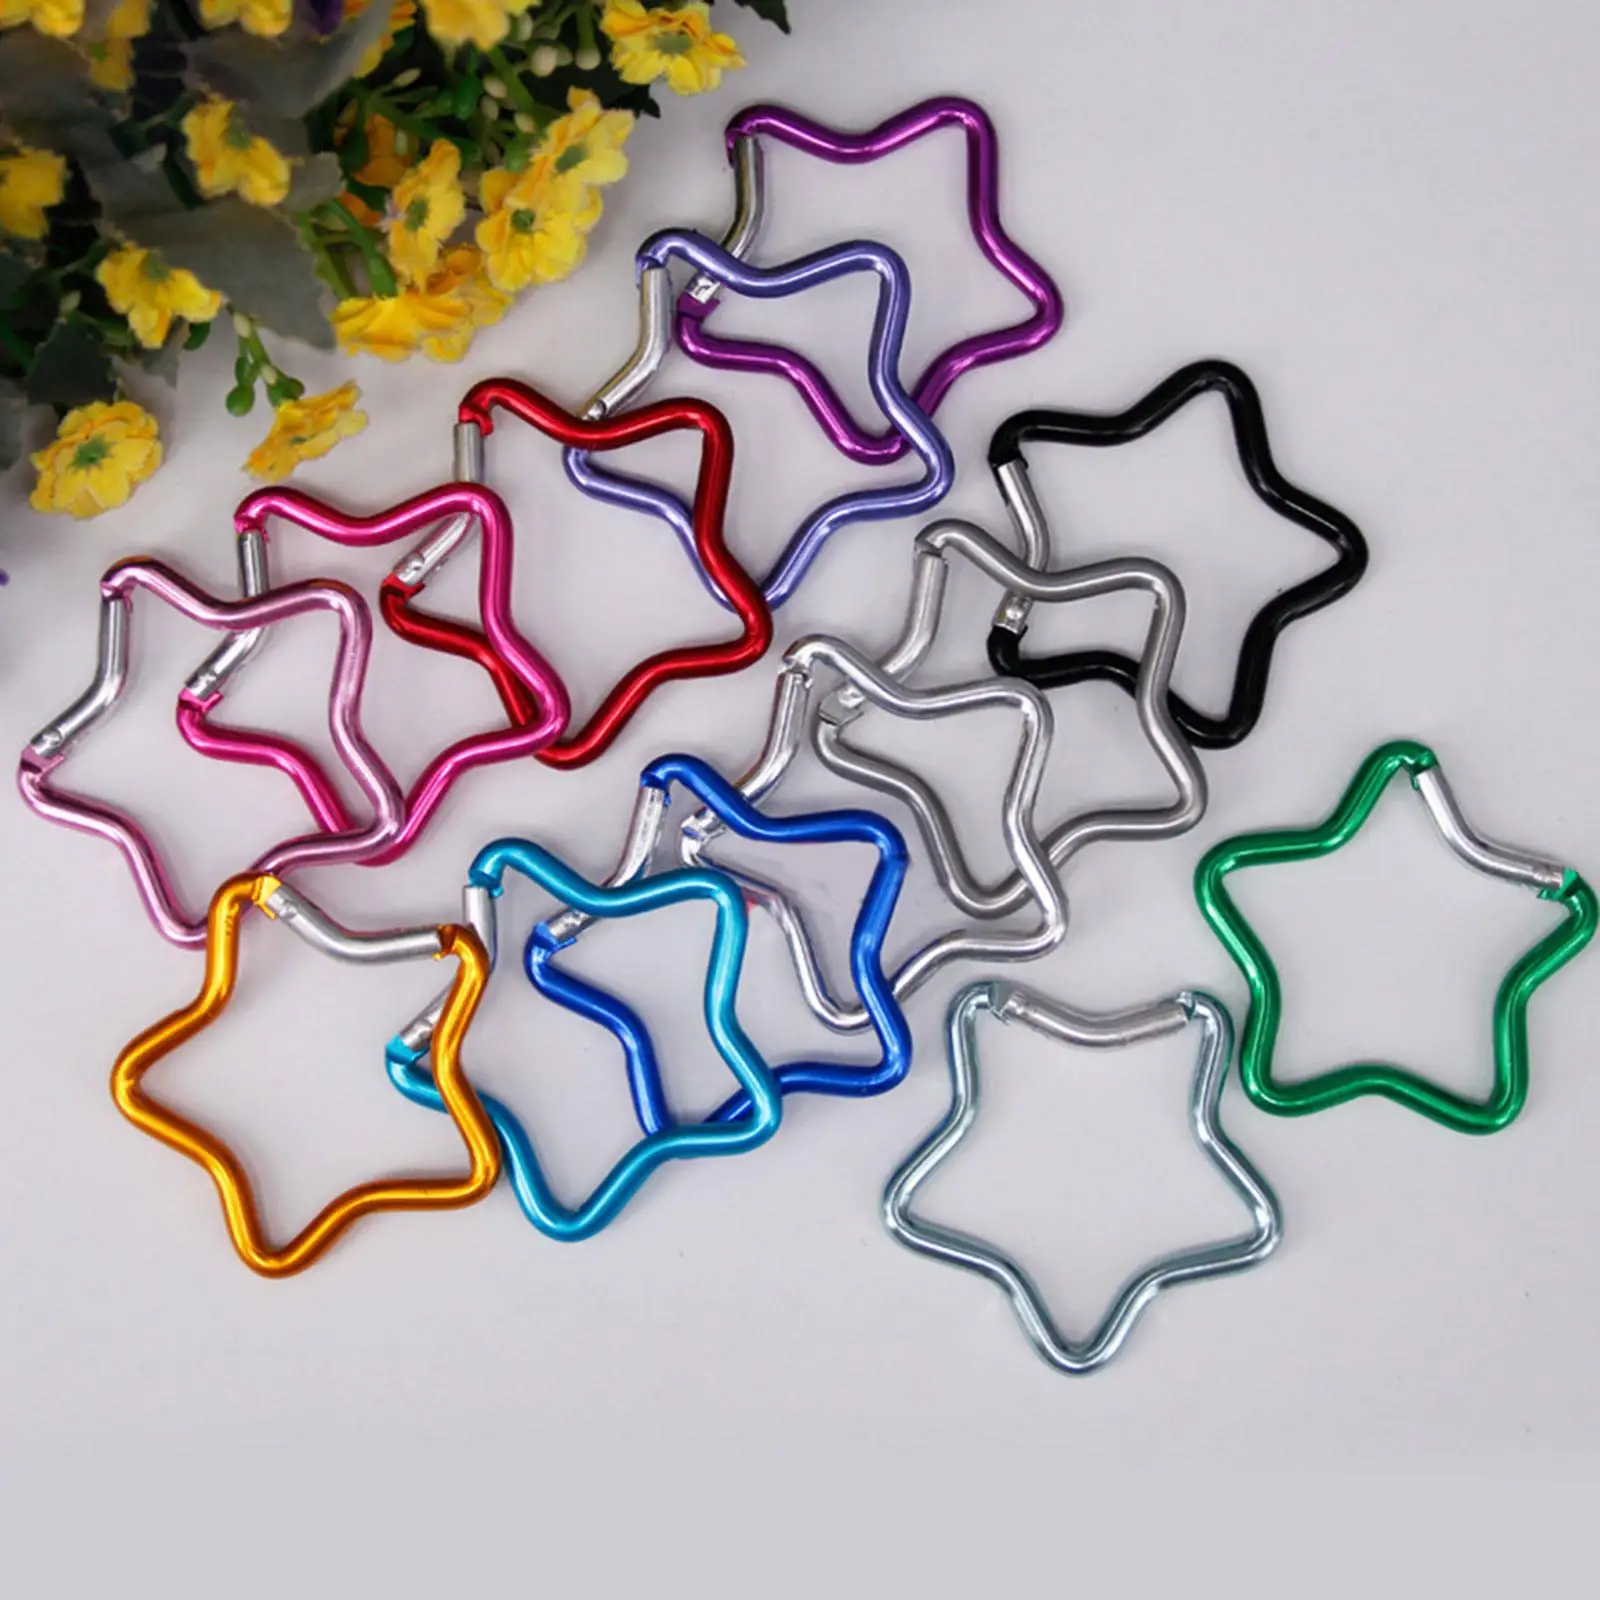 10x Five Pointed Star Shaped Carabiner Keyring Hook Heavy Duty Key Chain Clip for Fishing Hiking Traveling Camping Accessories 